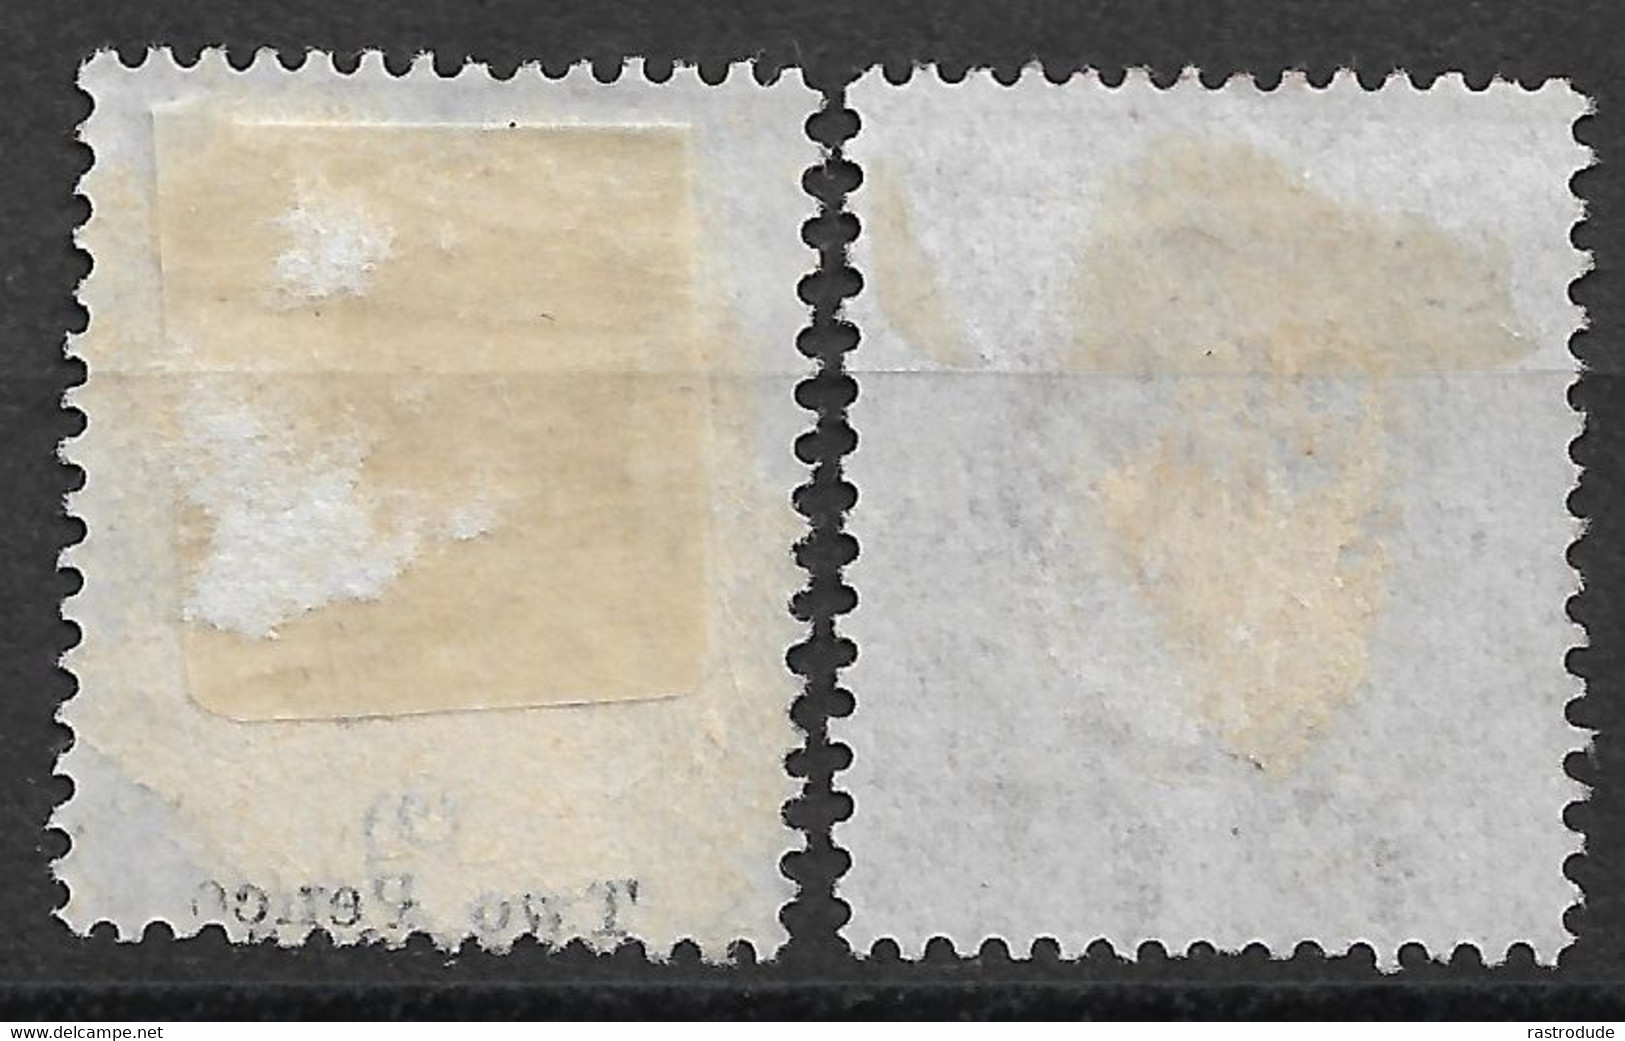 1863-72 MAURITIUS - 2d,4d SG. 59, 62 - CANCELLED Overprint. - UNUSED - Maurice (...-1967)